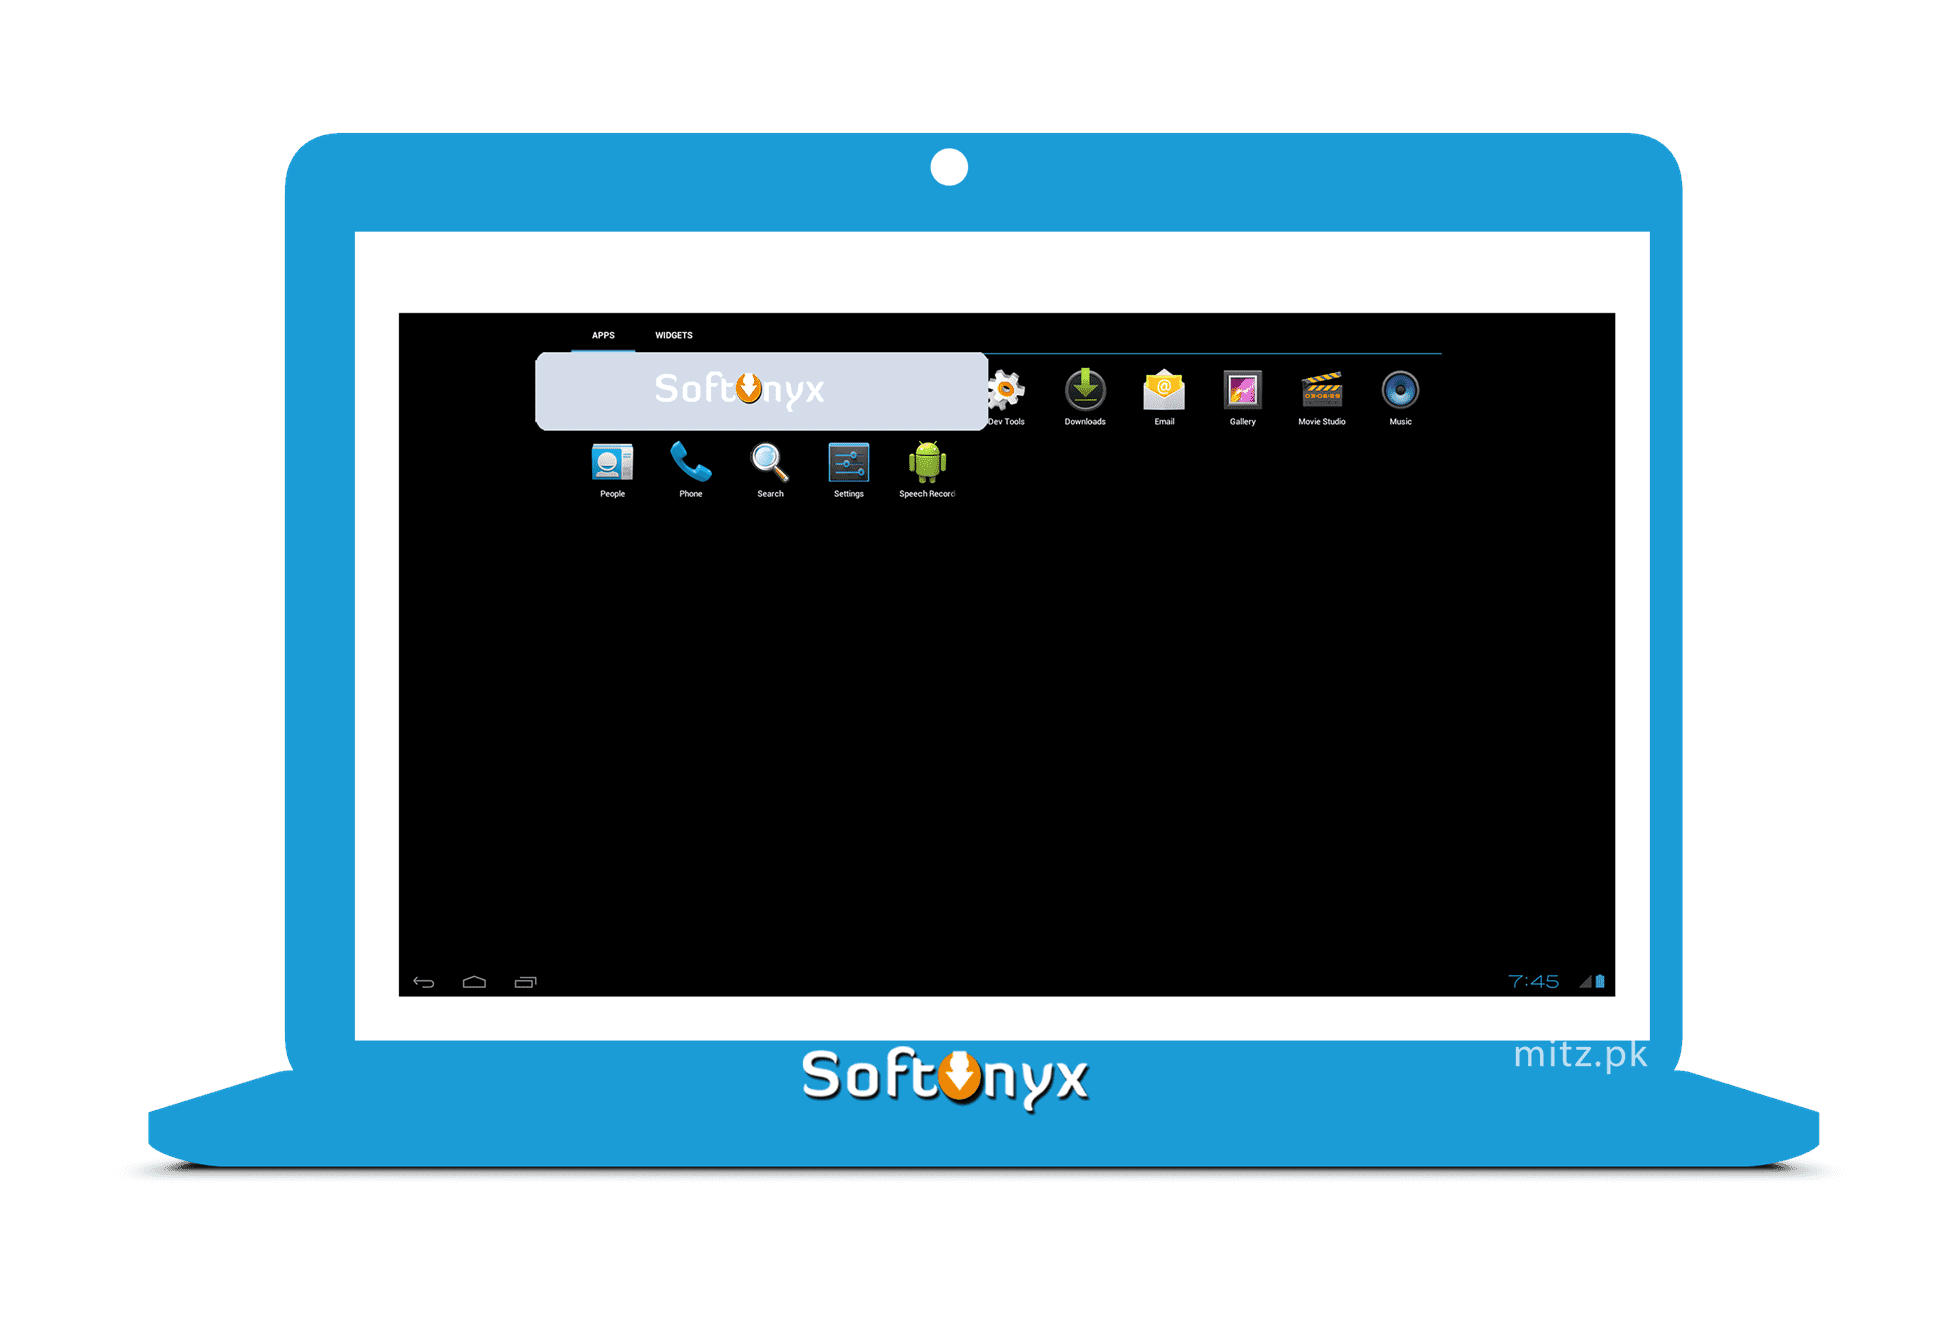 windroy for windows 10